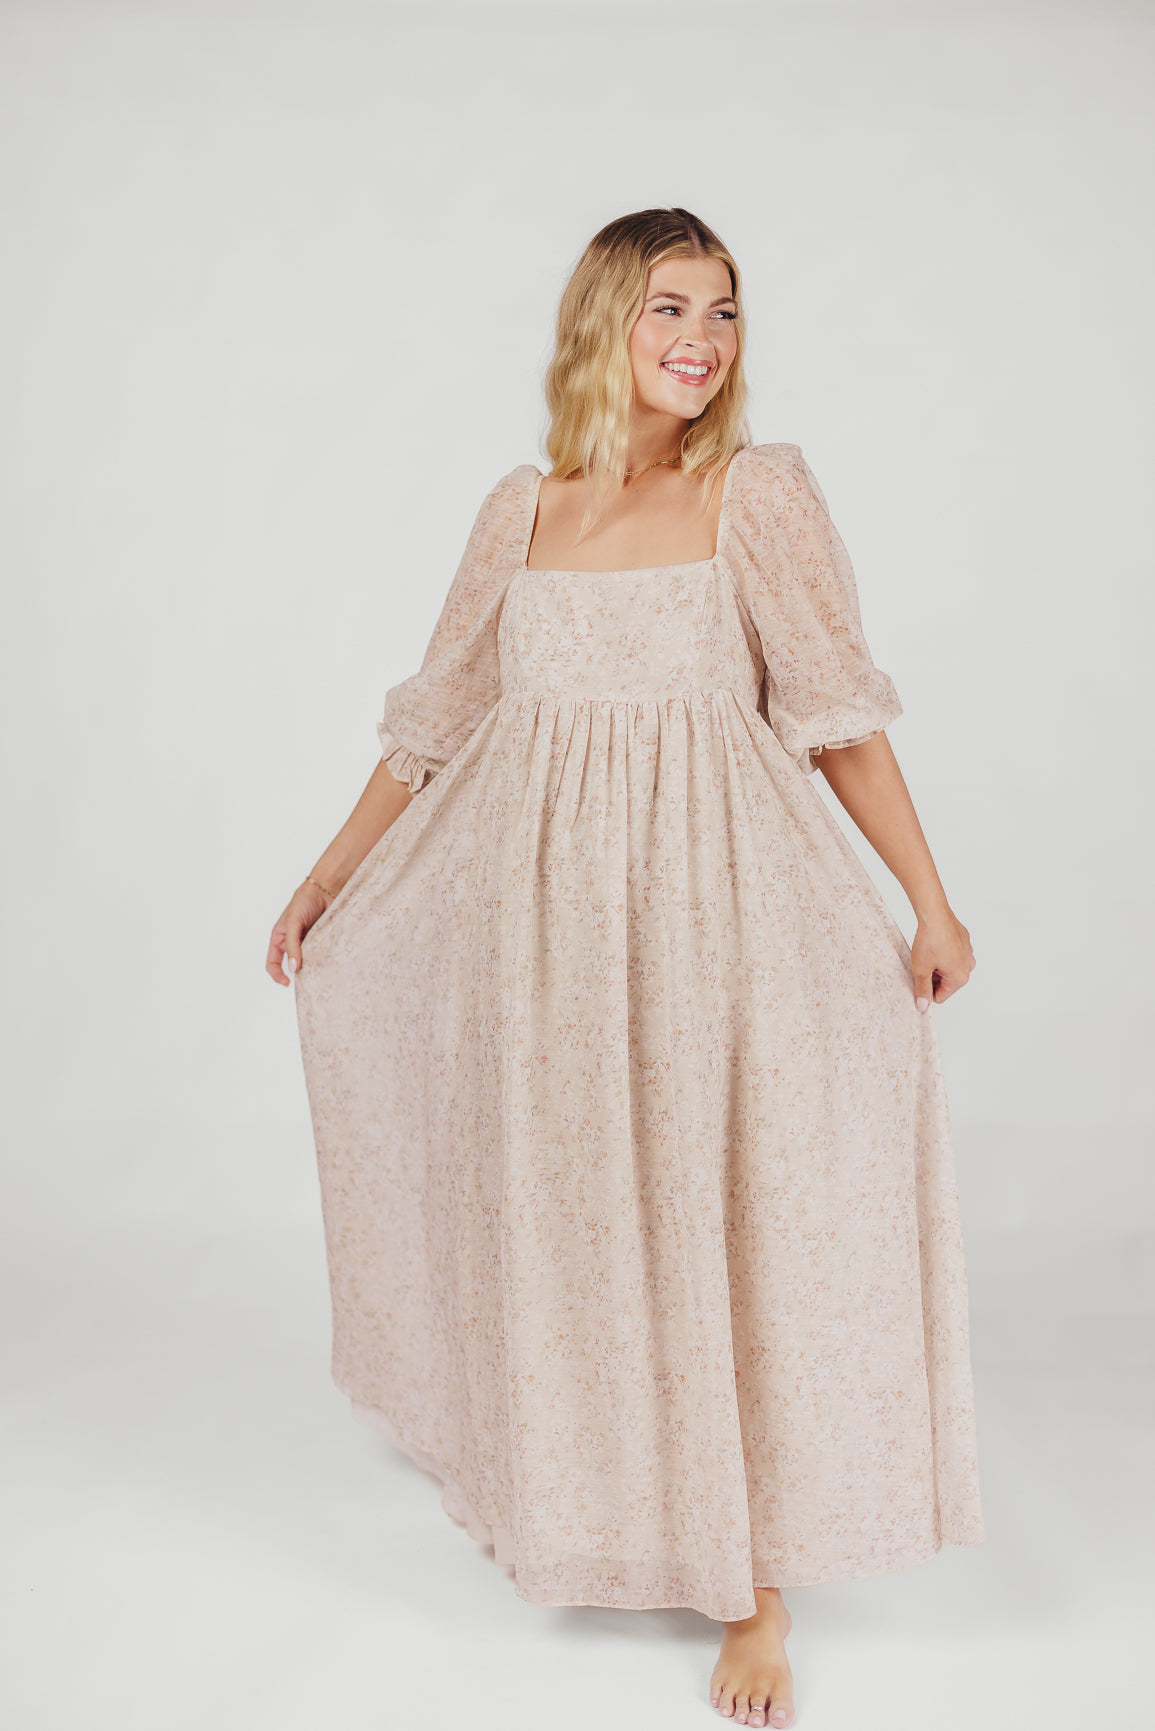 *New* Mona Maxi Dress with Smocking in Beige Floral - Bump Friendly & Inclusive Sizing (S-3XL)